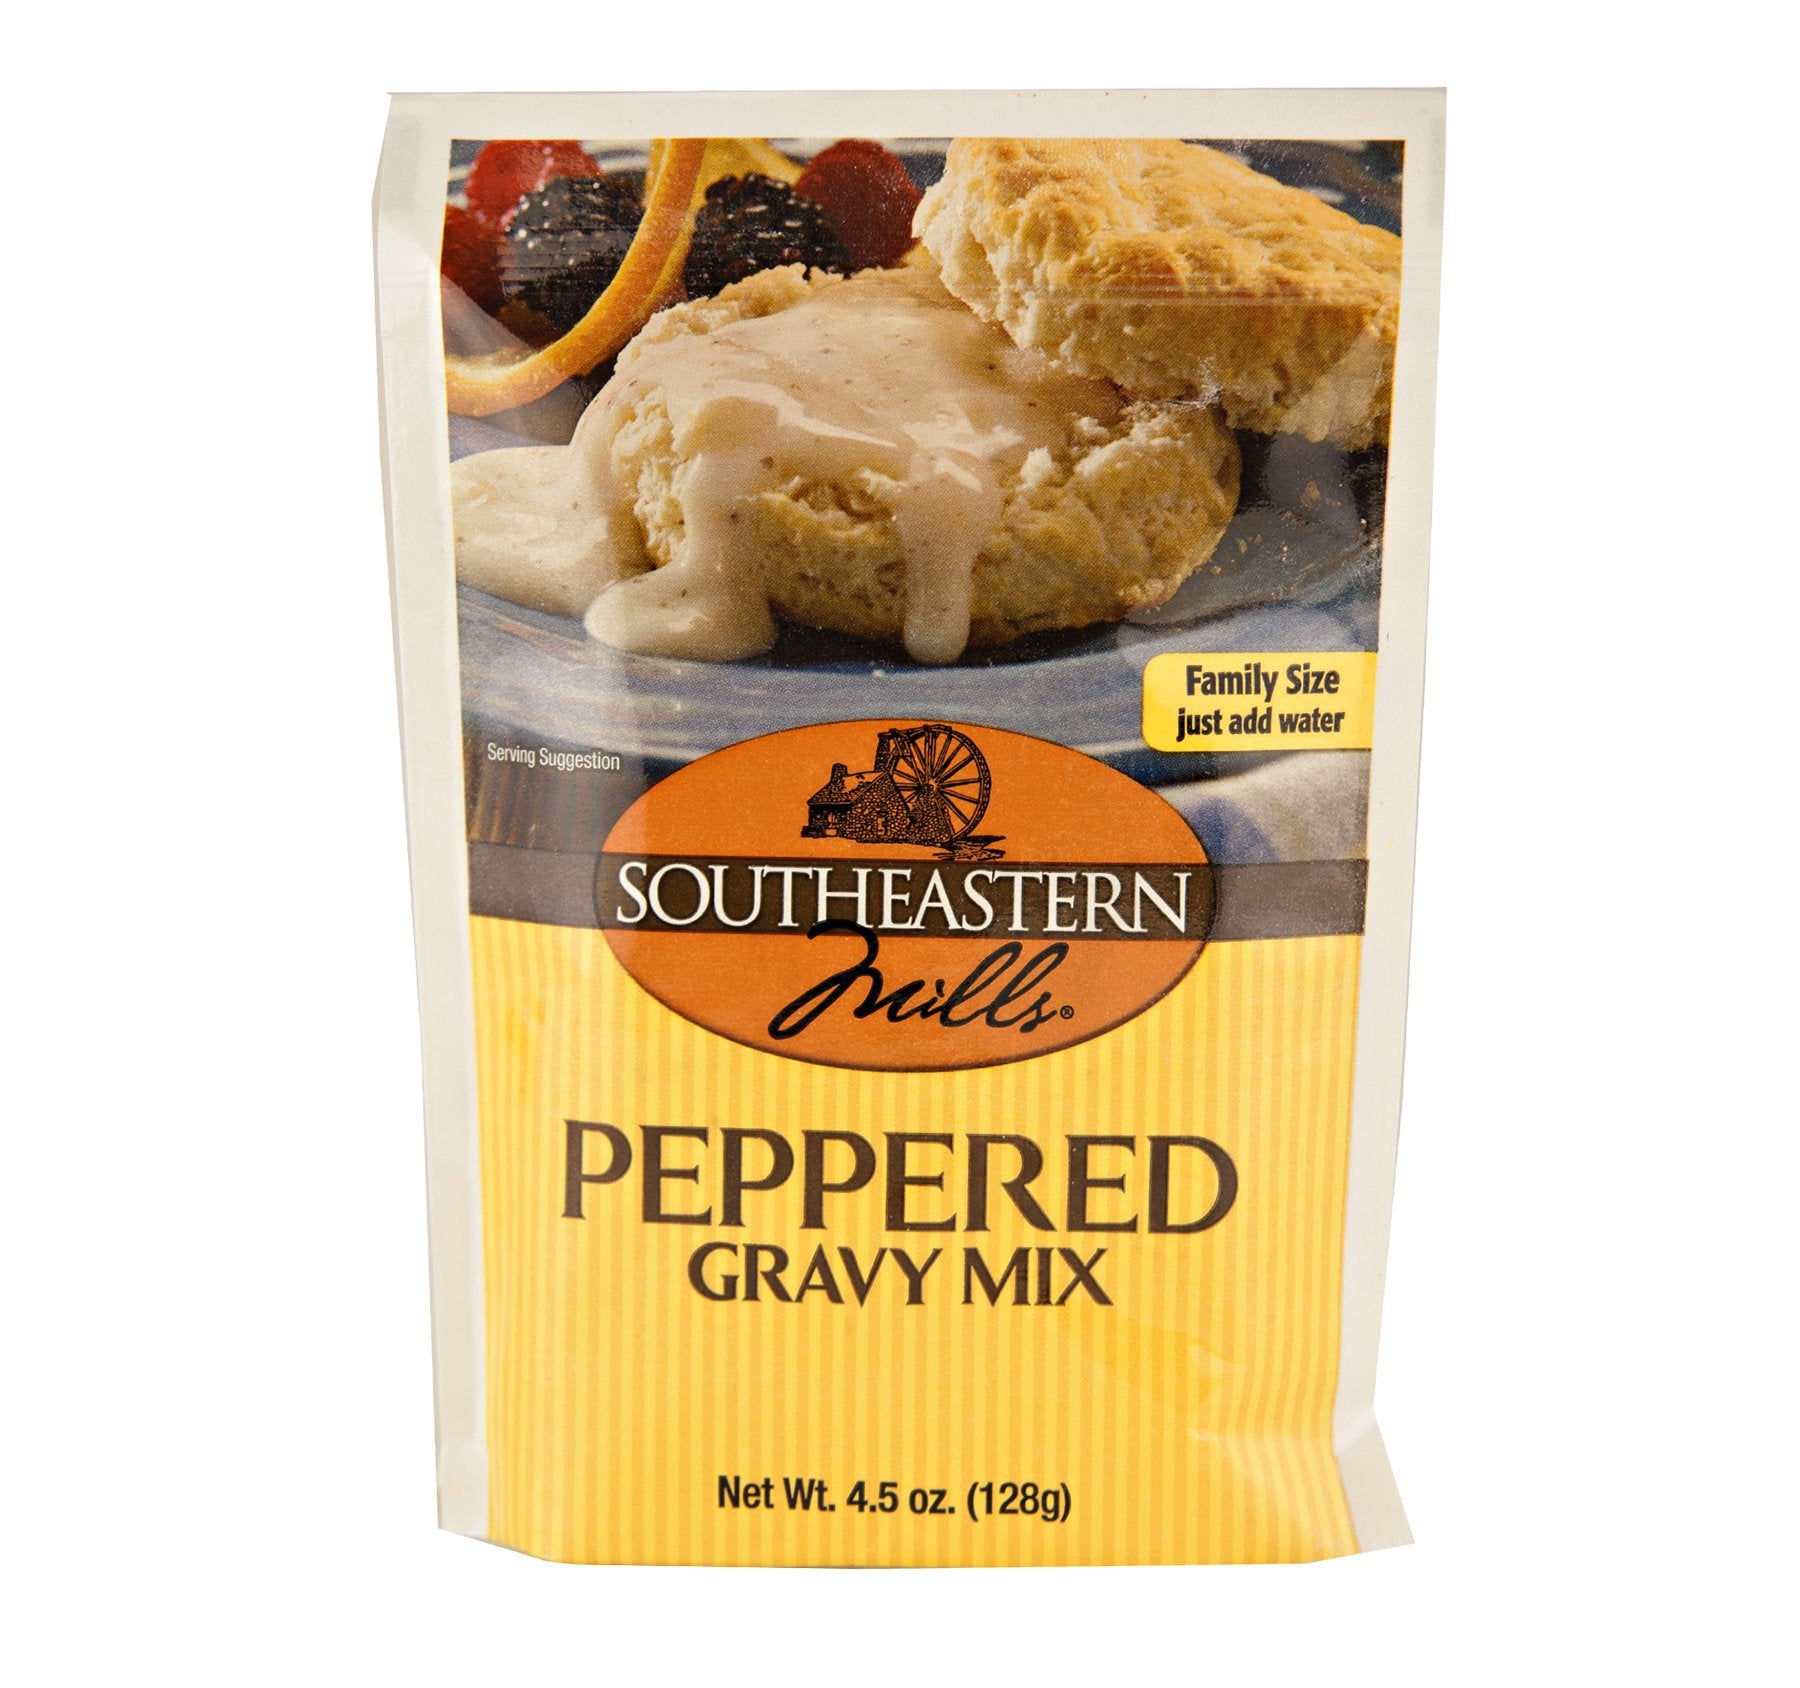 Southeastern Mills Peppered Gravy Mix 4.5oz 24 Count